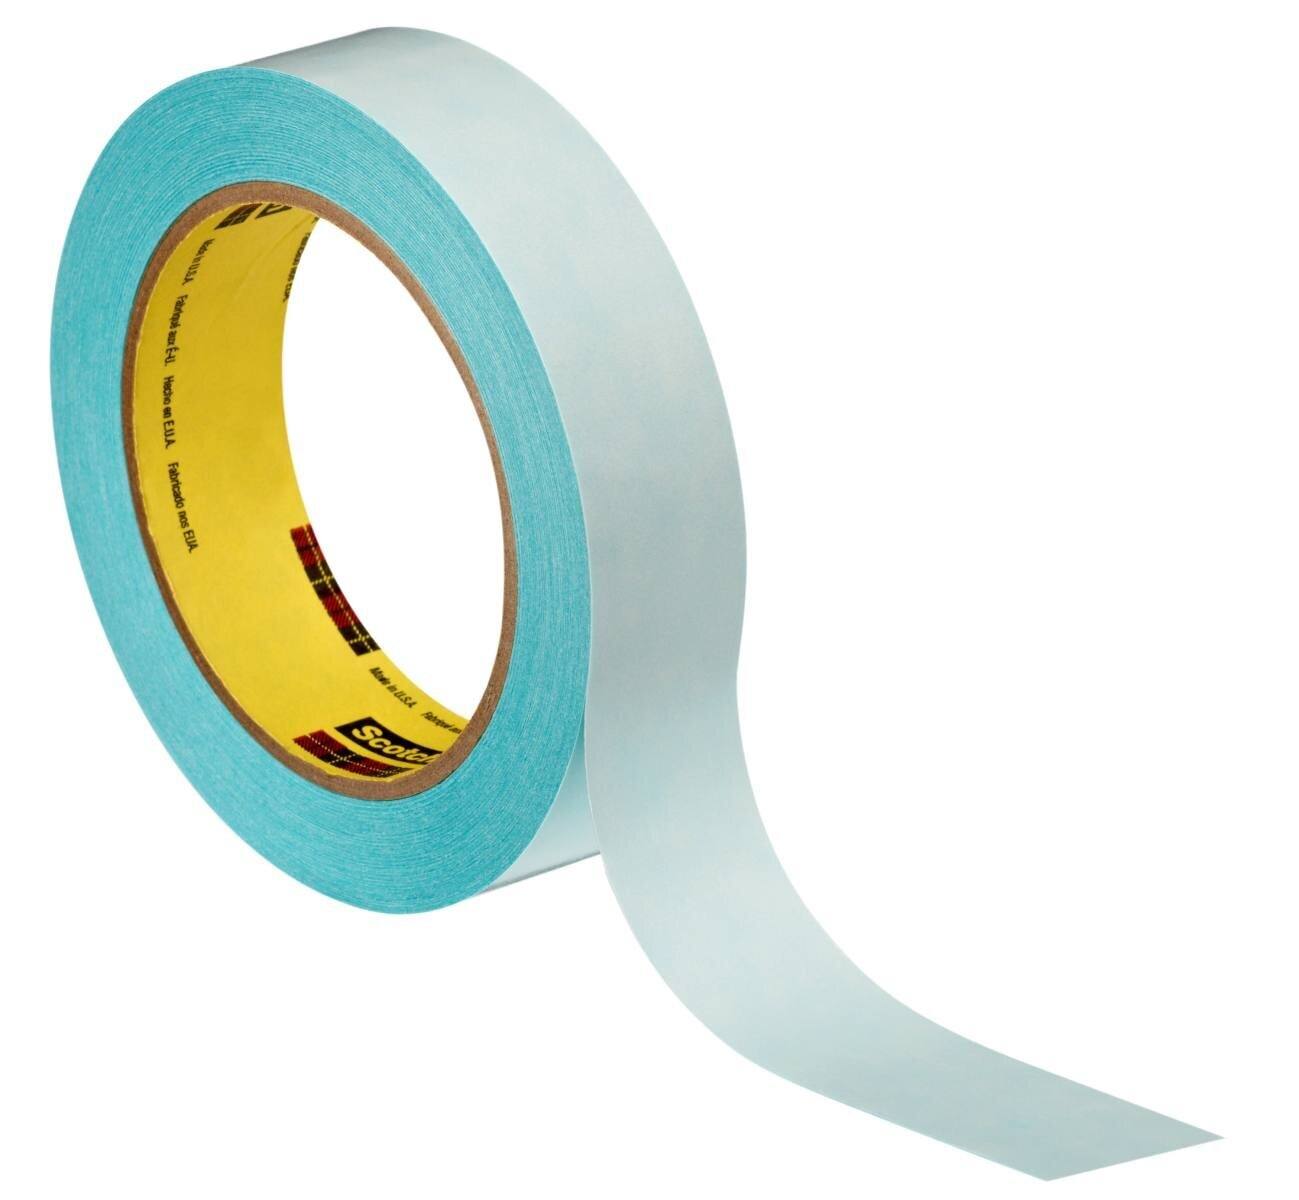 3M Double-sided adhesive tape 906B, blue, 50 mm x 50 m, 0.08 mm